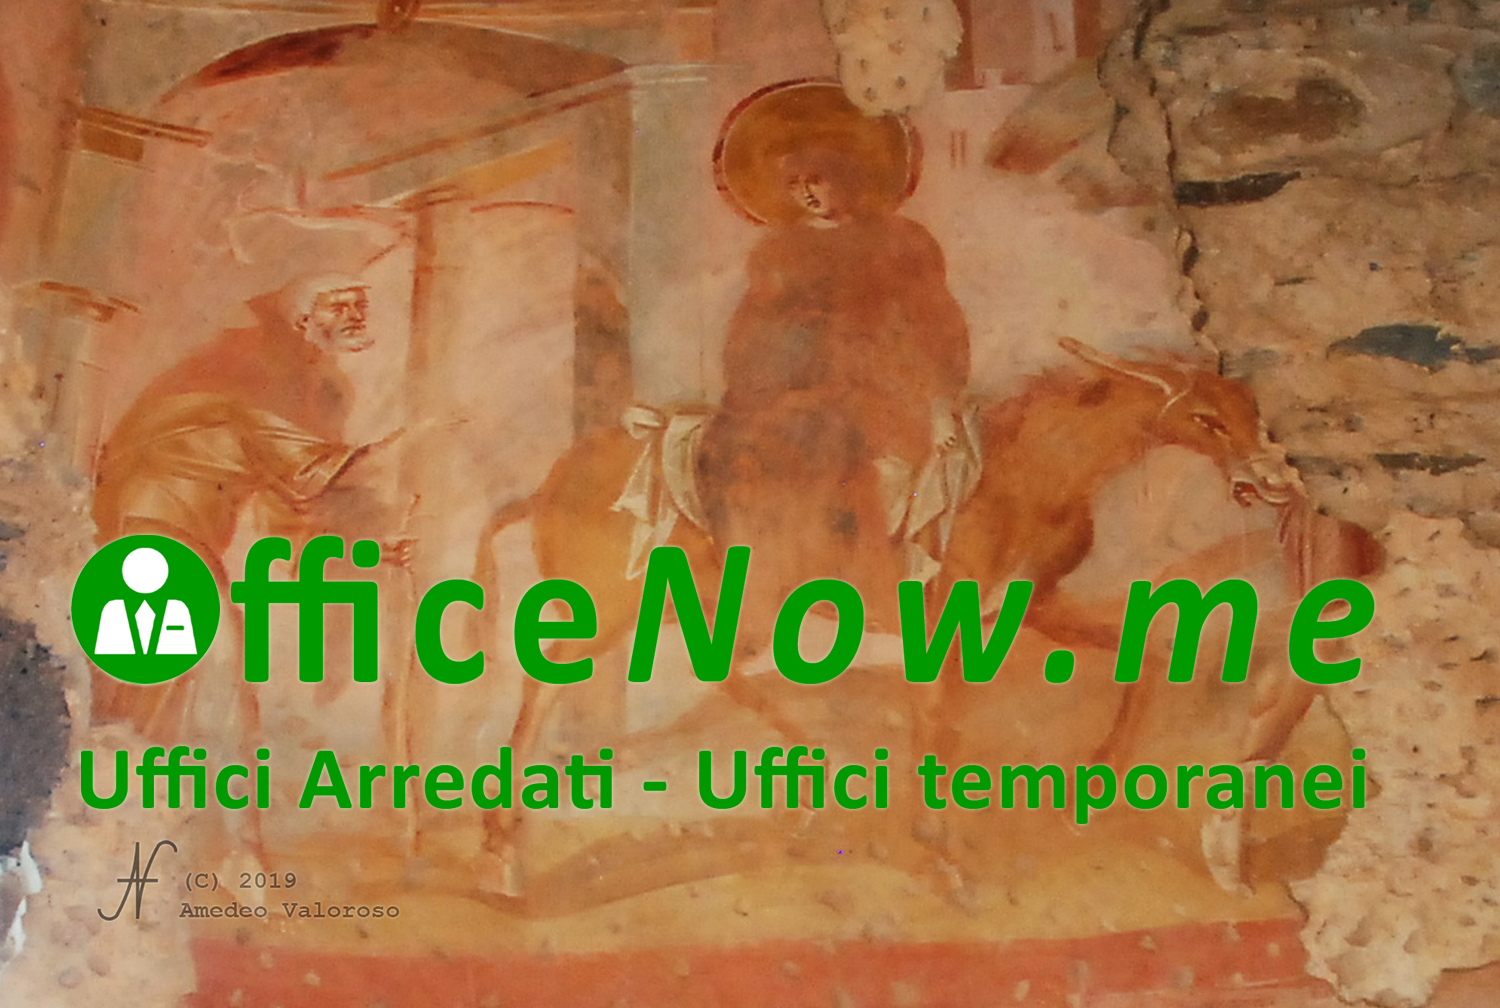 OfficeNow, business center, furnished offices, temporary offices, Castelseprio, Santa Maria Foris Porta, frescoes, apocryphal gospels, corporate meetings and art